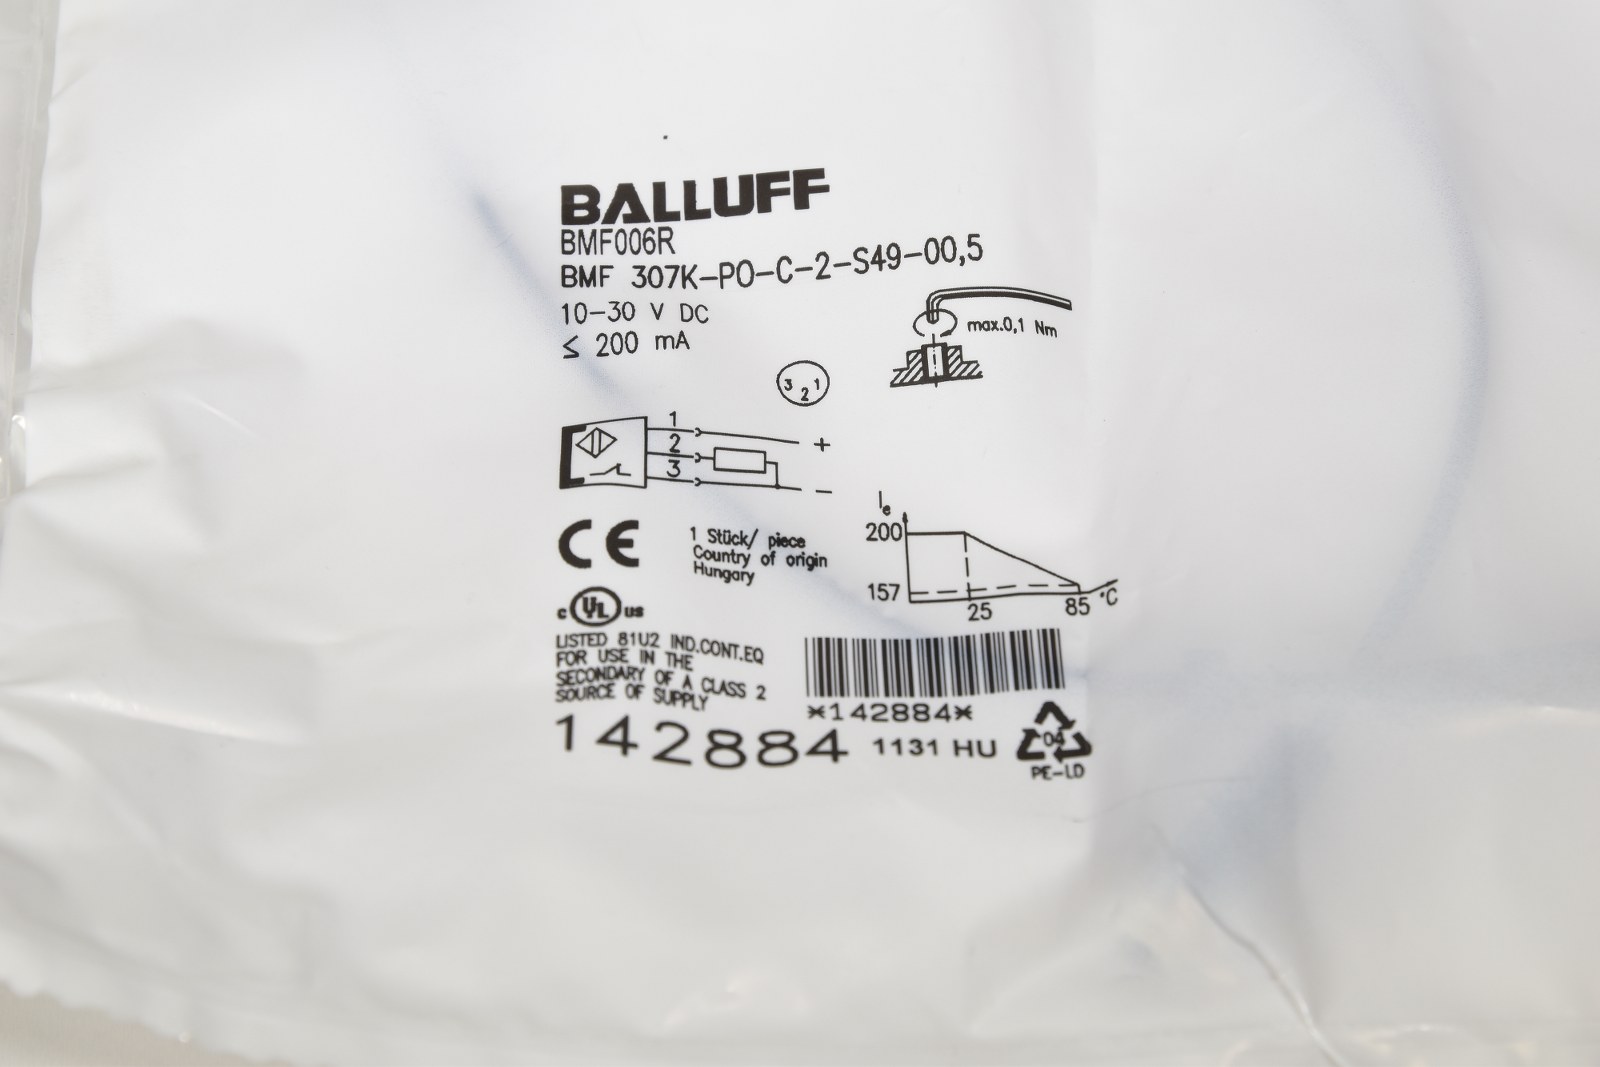 Magnetic Field Sensor Details about   BALLUFF BMF006R BMF 307K-PO-C-2-S49-00,5 NEW 